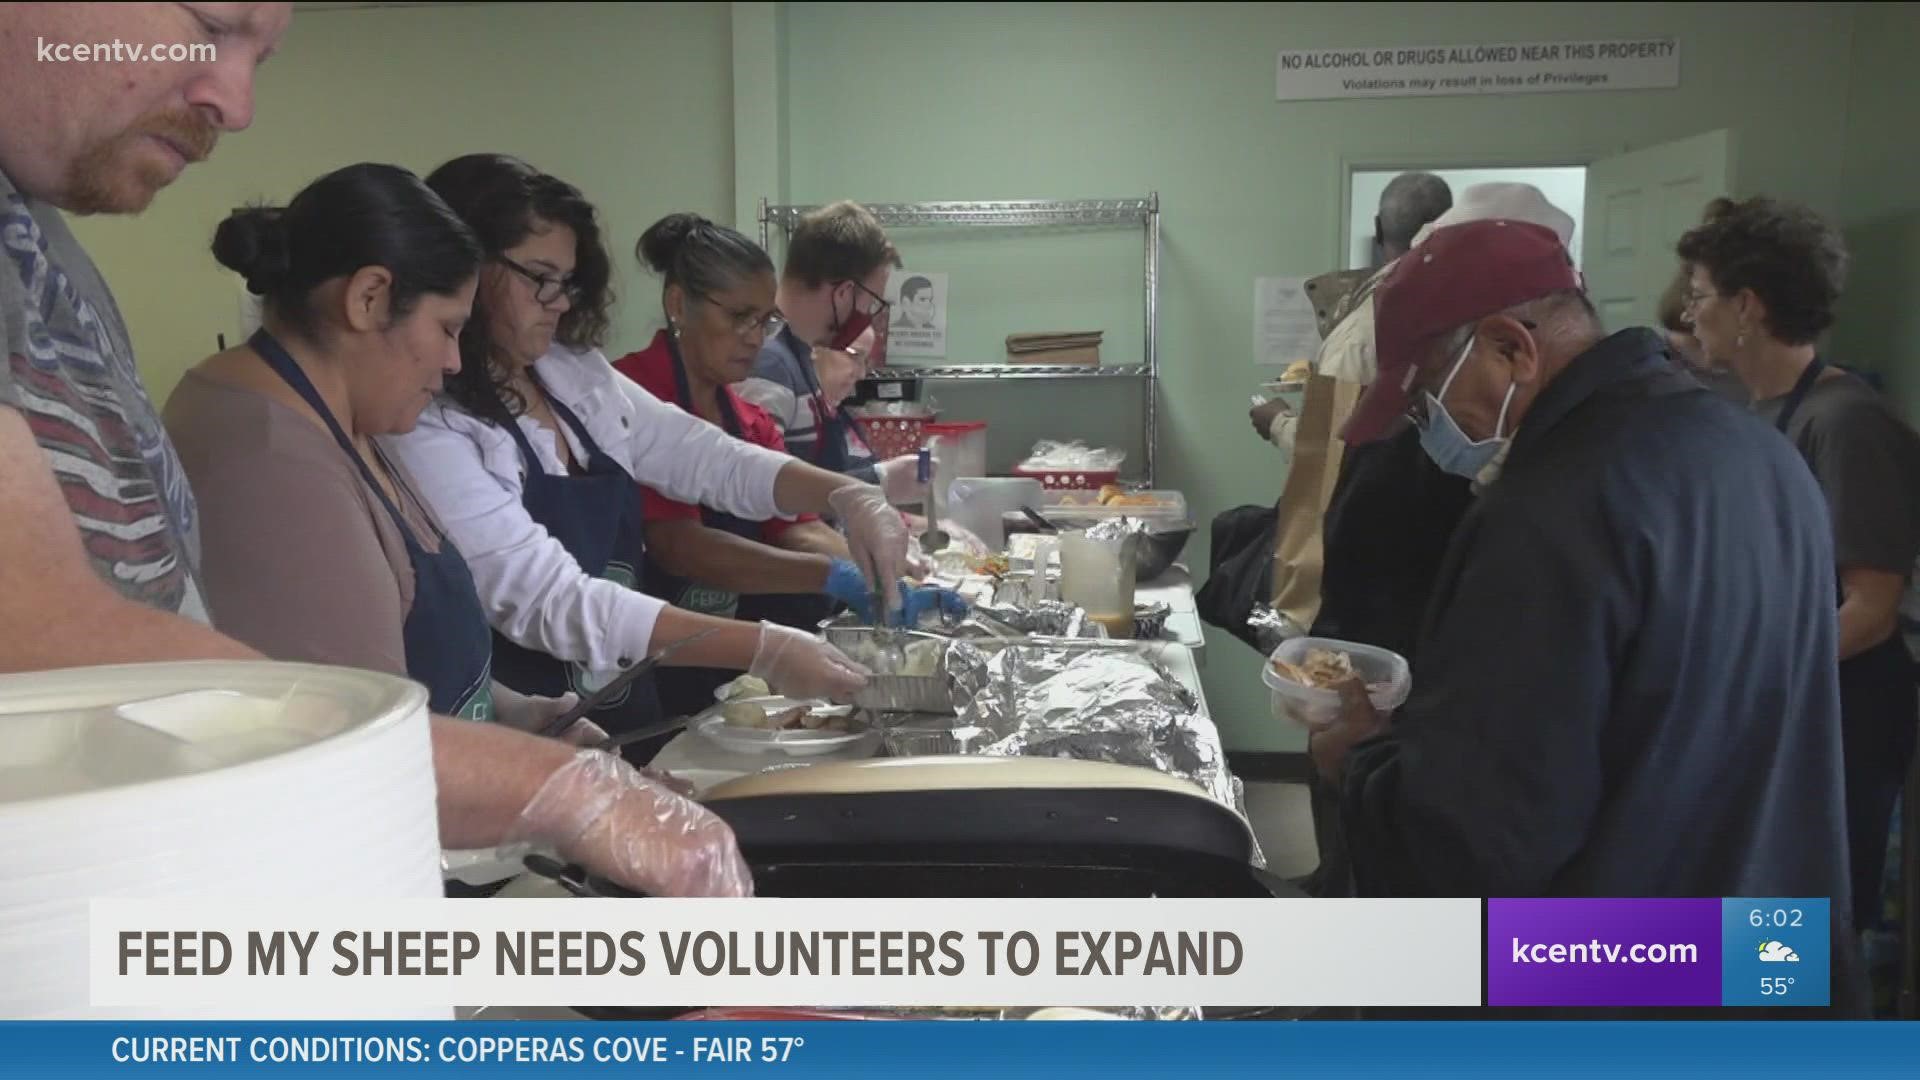 Several hundred people were able to get a warm Thanksgiving meal in Temple thanks to Feed My Sheep; the organization wants to expand its services to help homeless.